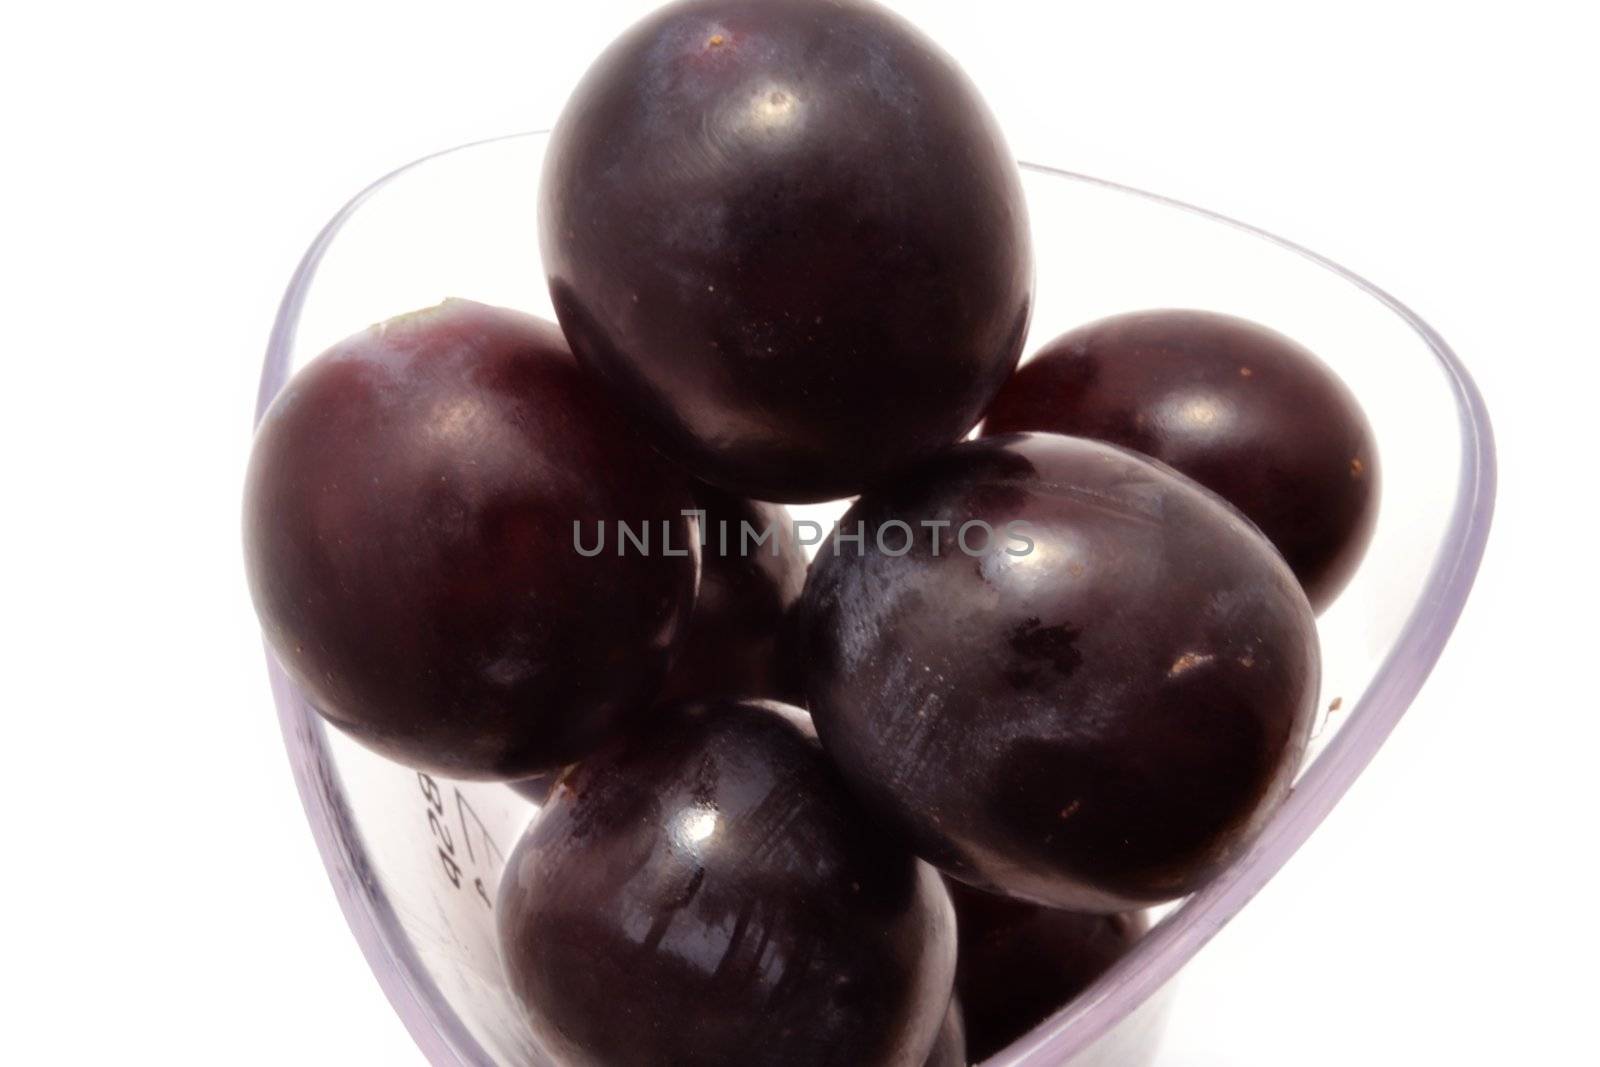 Top view of black grapes inside measuring glass